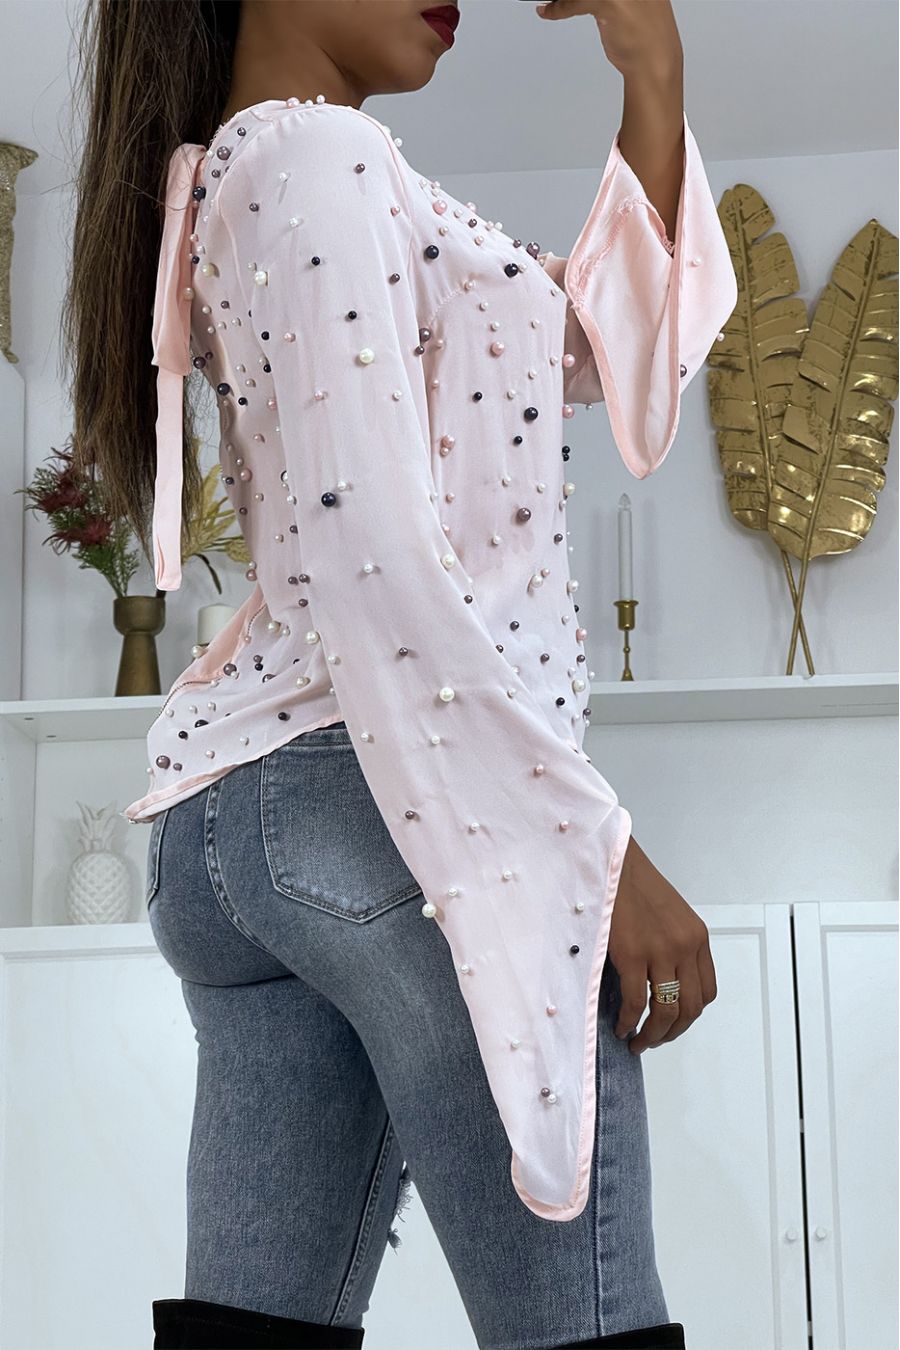 Discover our inexpensive pink tops